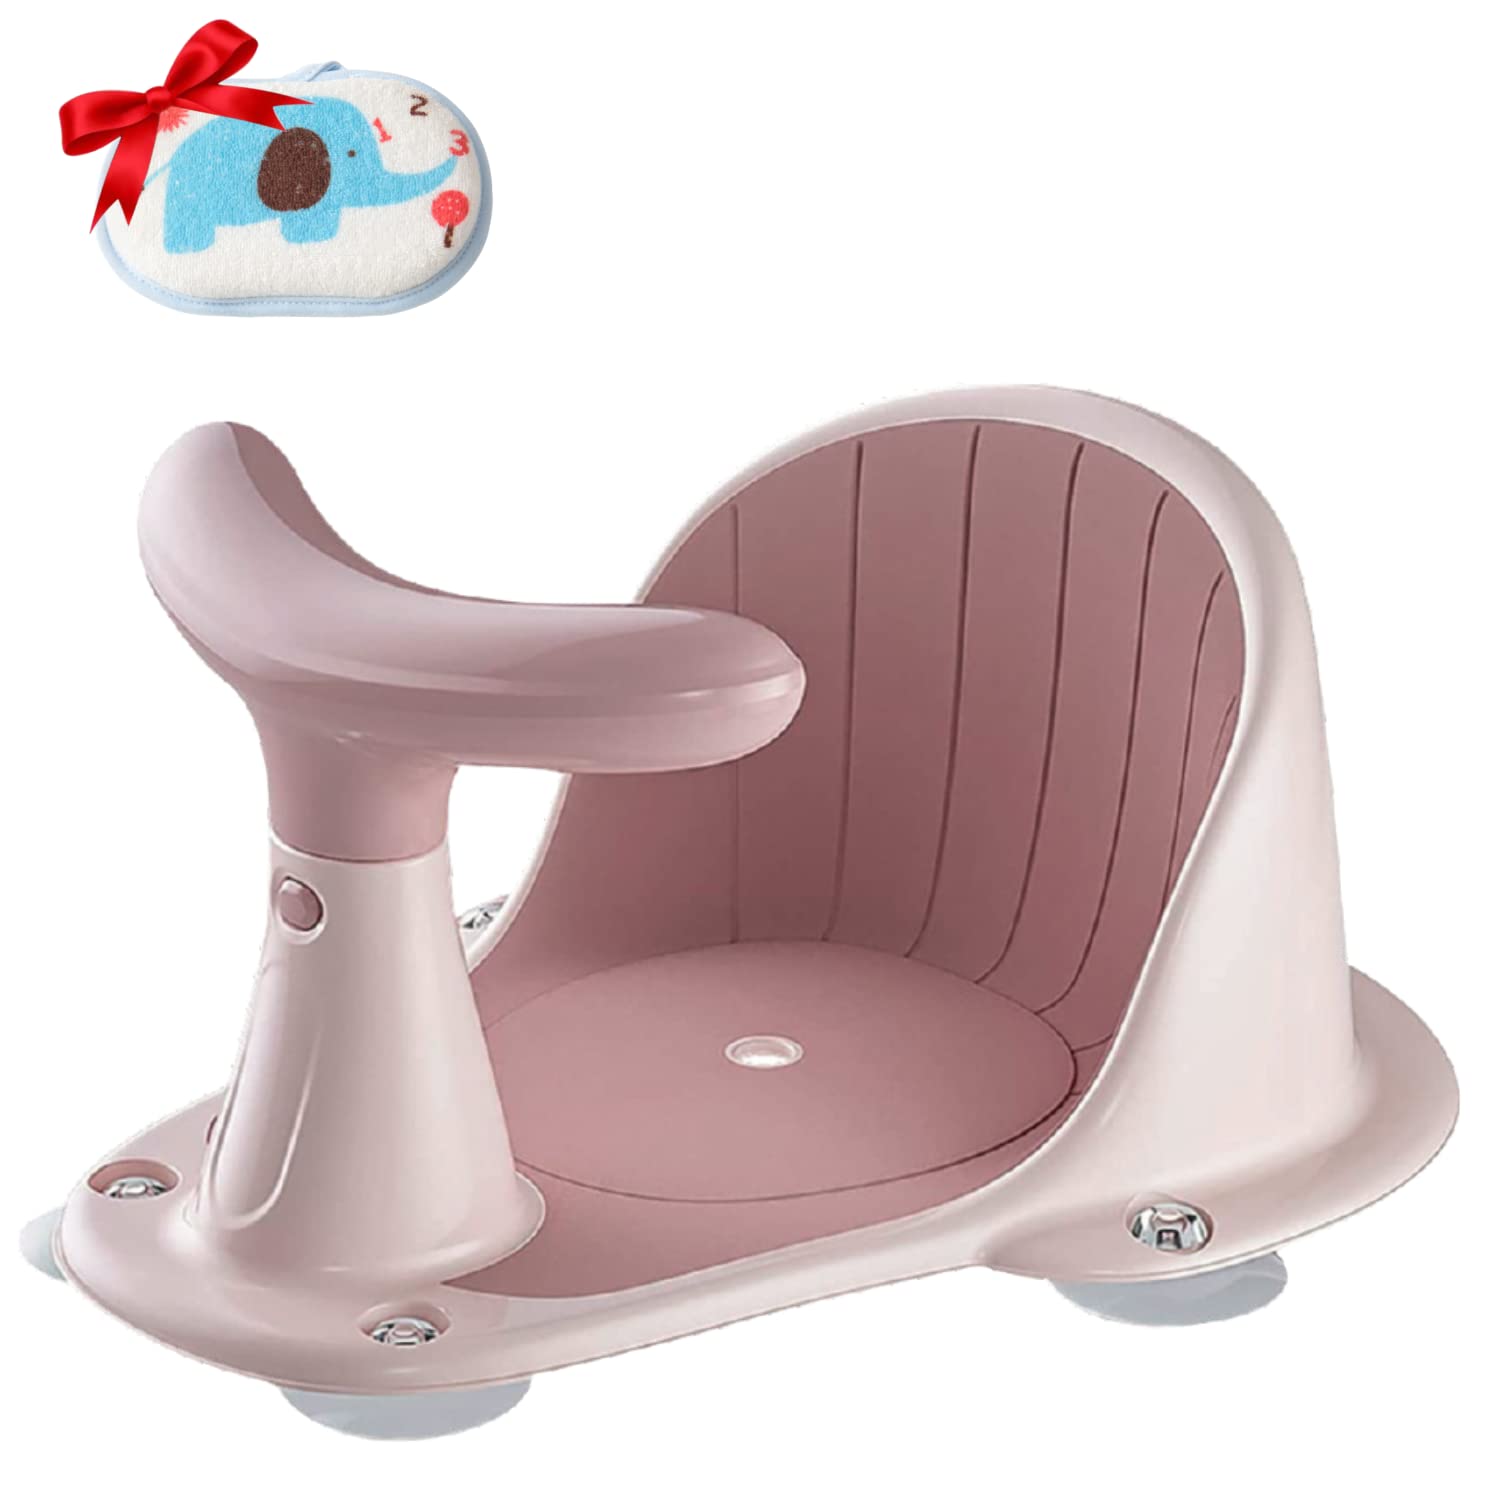 Baby Bath Seat for Babies 3 Months & Up - Infant Bathtub Seats for Sitting up in The tub - Bath Tub Seater for Baby with Baby Bath Pink